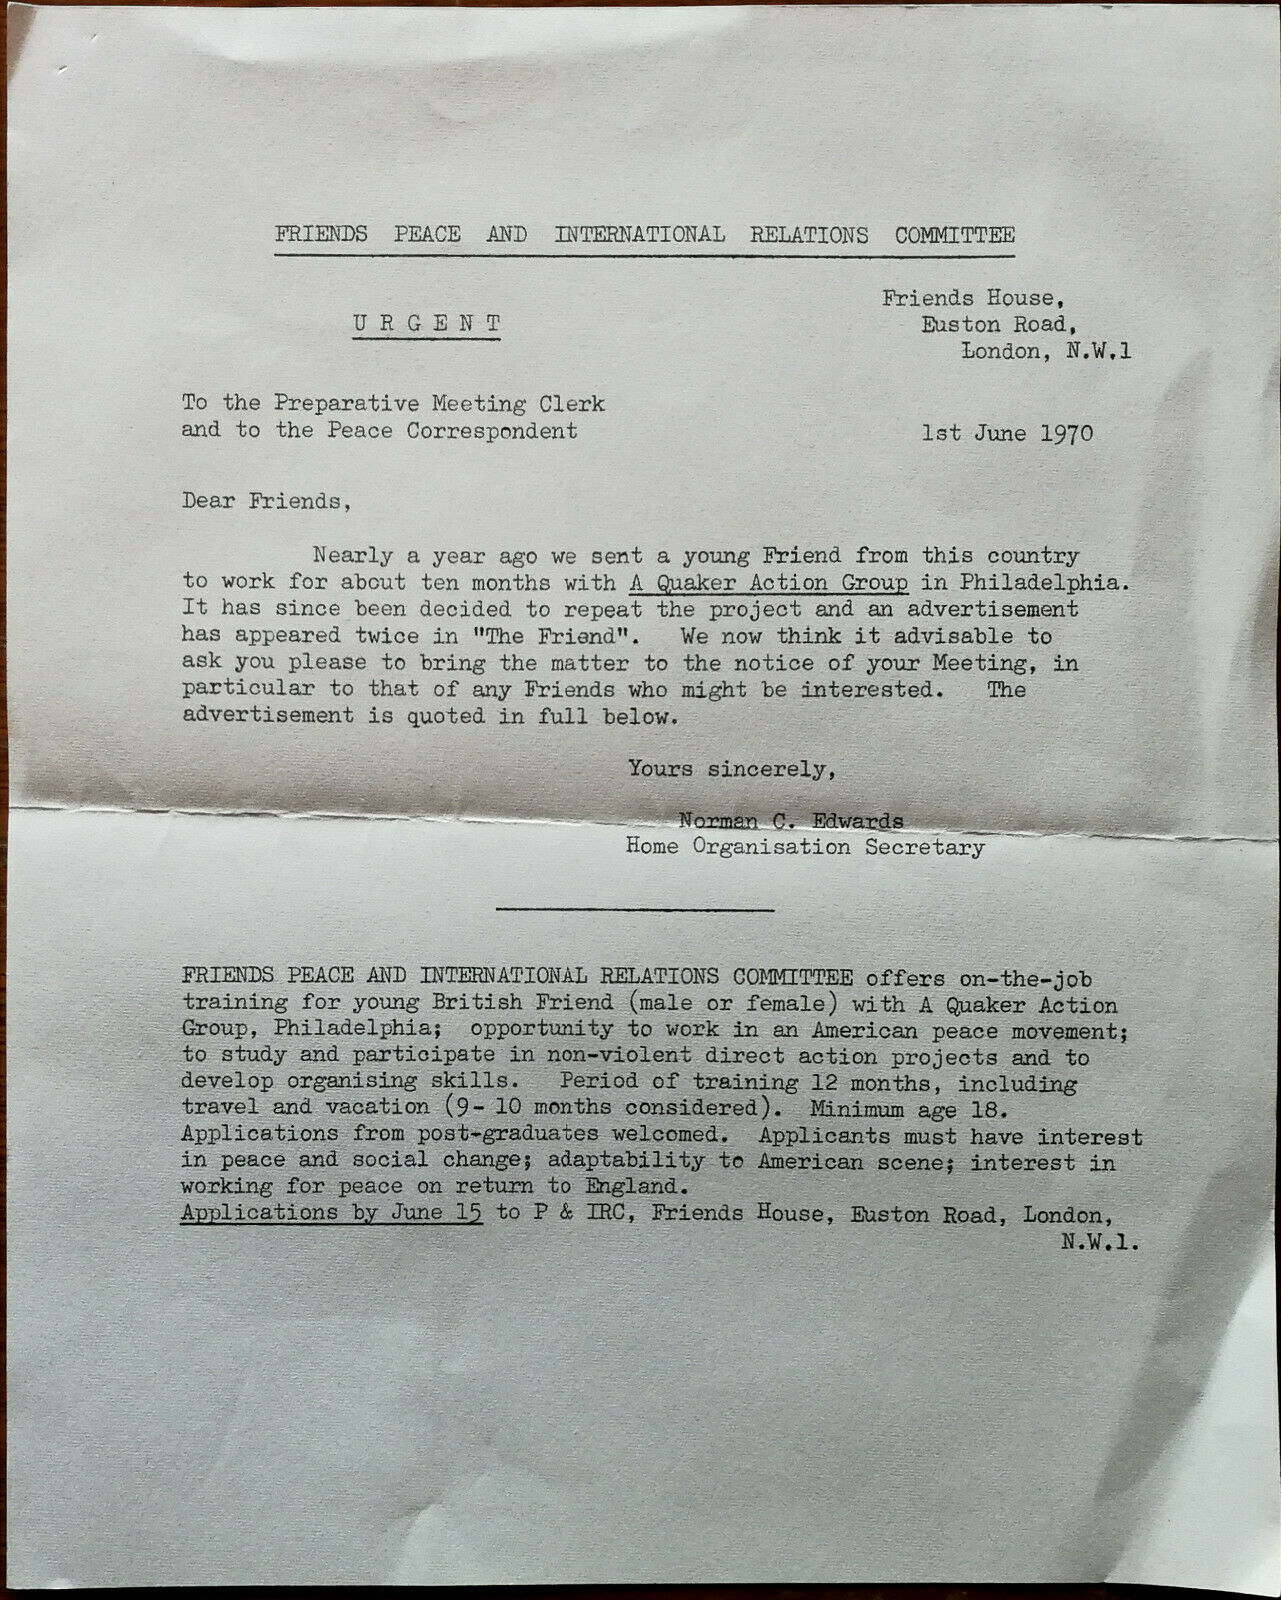 Friends Peace And International Relations Committee, London Uk Letter June 1970